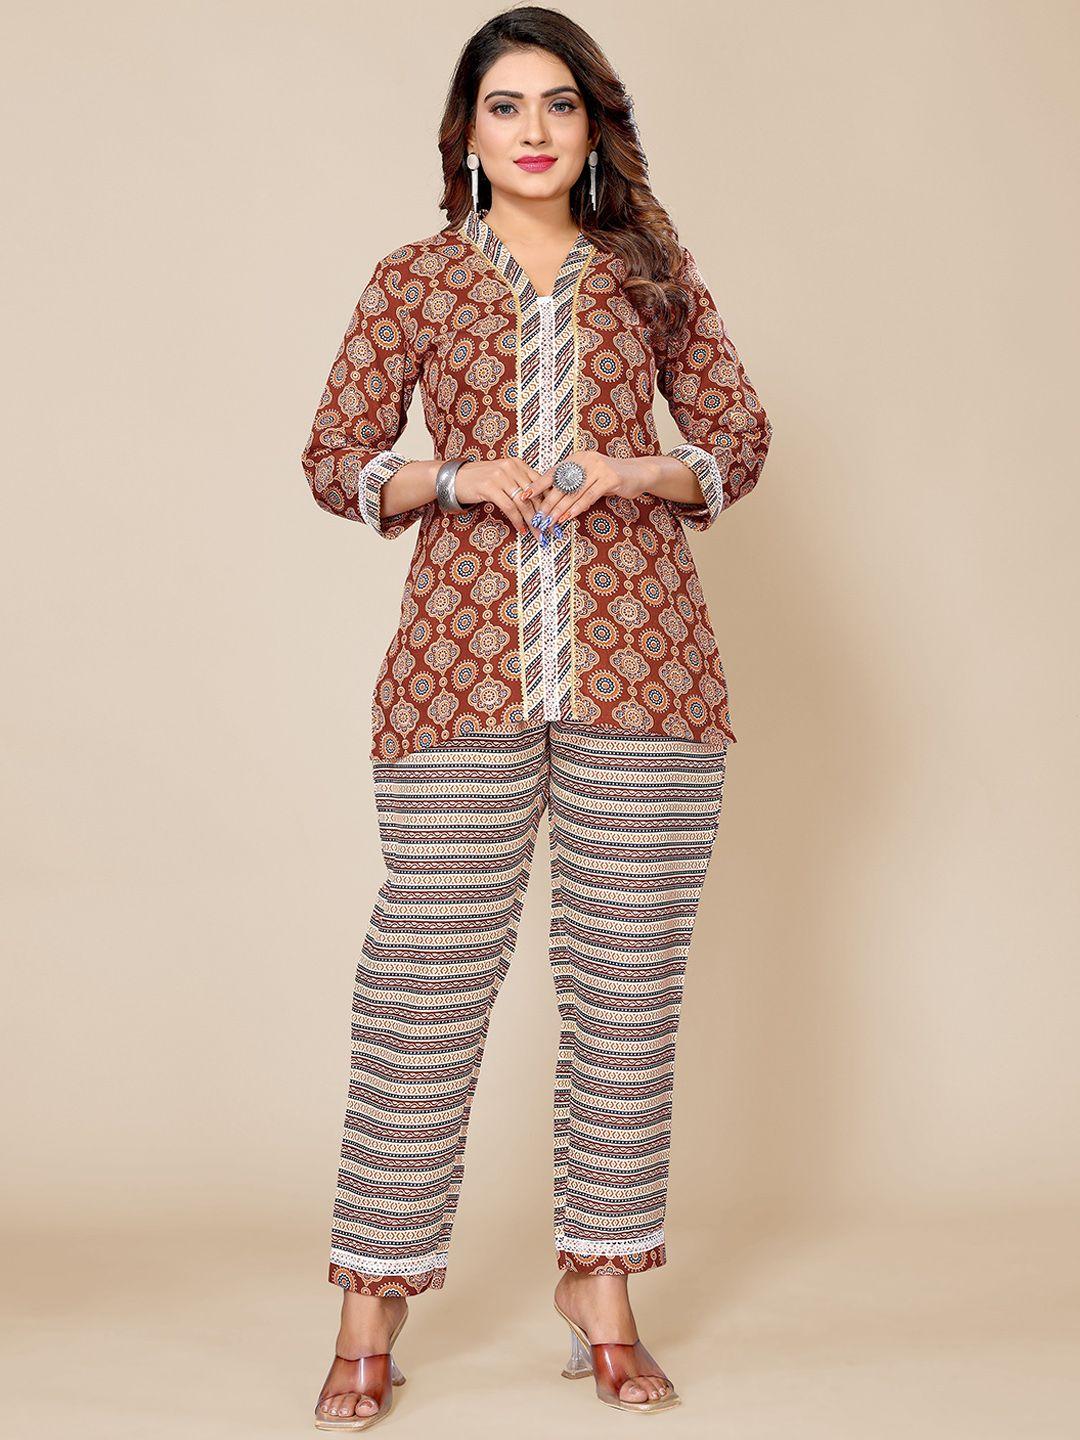 krimmple ethnic motifs printed top & trousers co-ords set